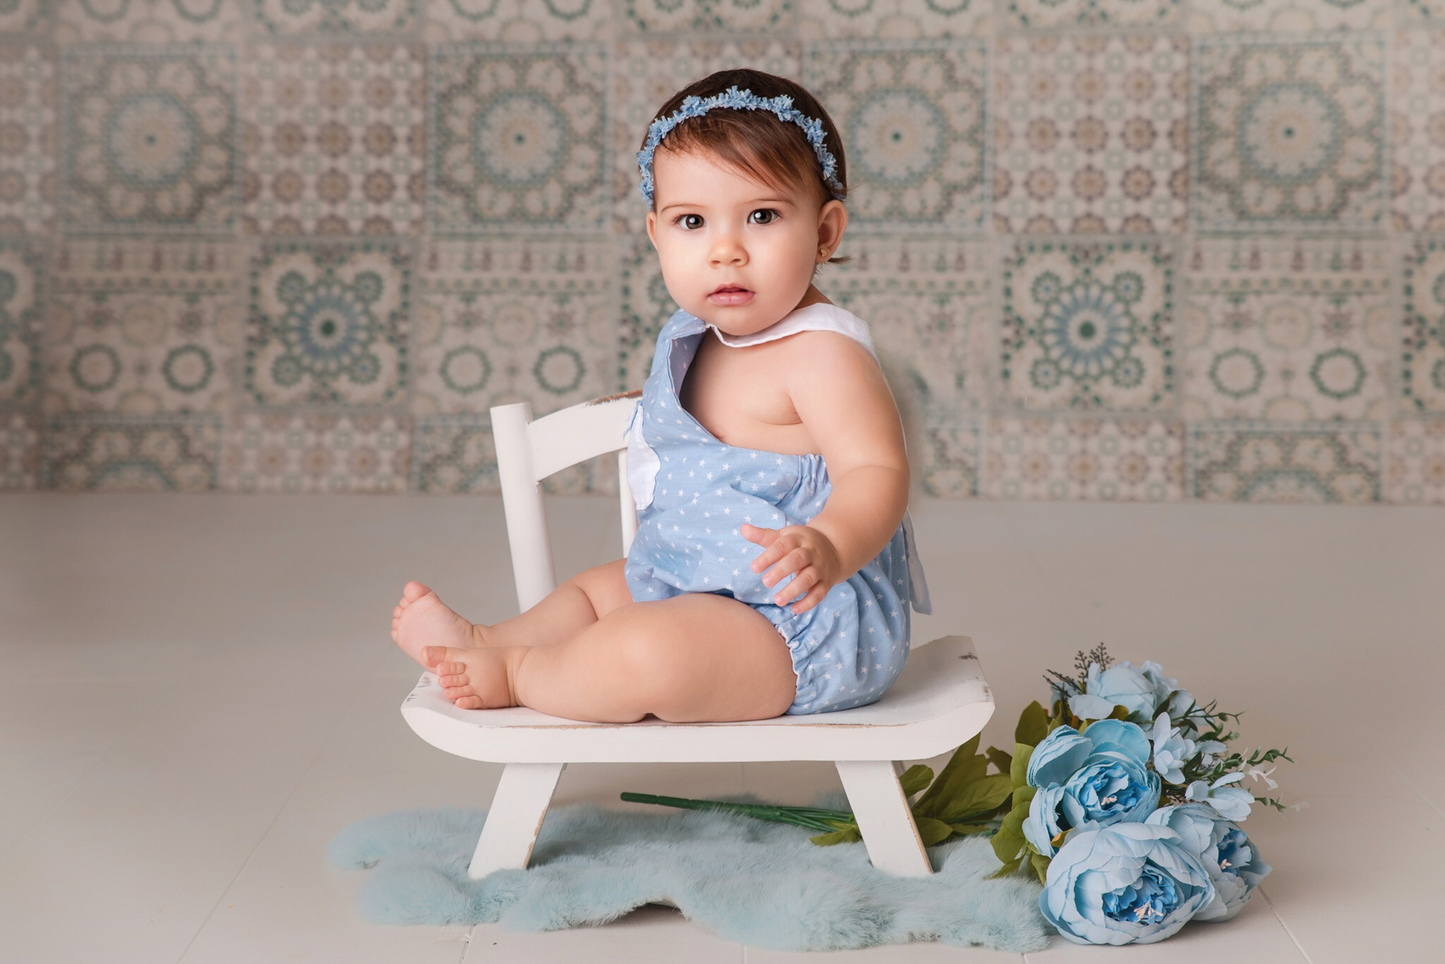 A curious baby sits comfortably on a white wide-base chair, dressed in a delicate blue polka-dotted dress, accessorized with a matching blue floral headband. The newborn photography prop is enhanced by a bouquet of silk blue flowers resting beside a soft, teal fur rug, all set against a backdrop of vintage-patterned tiles, creating a serene and charming scene.